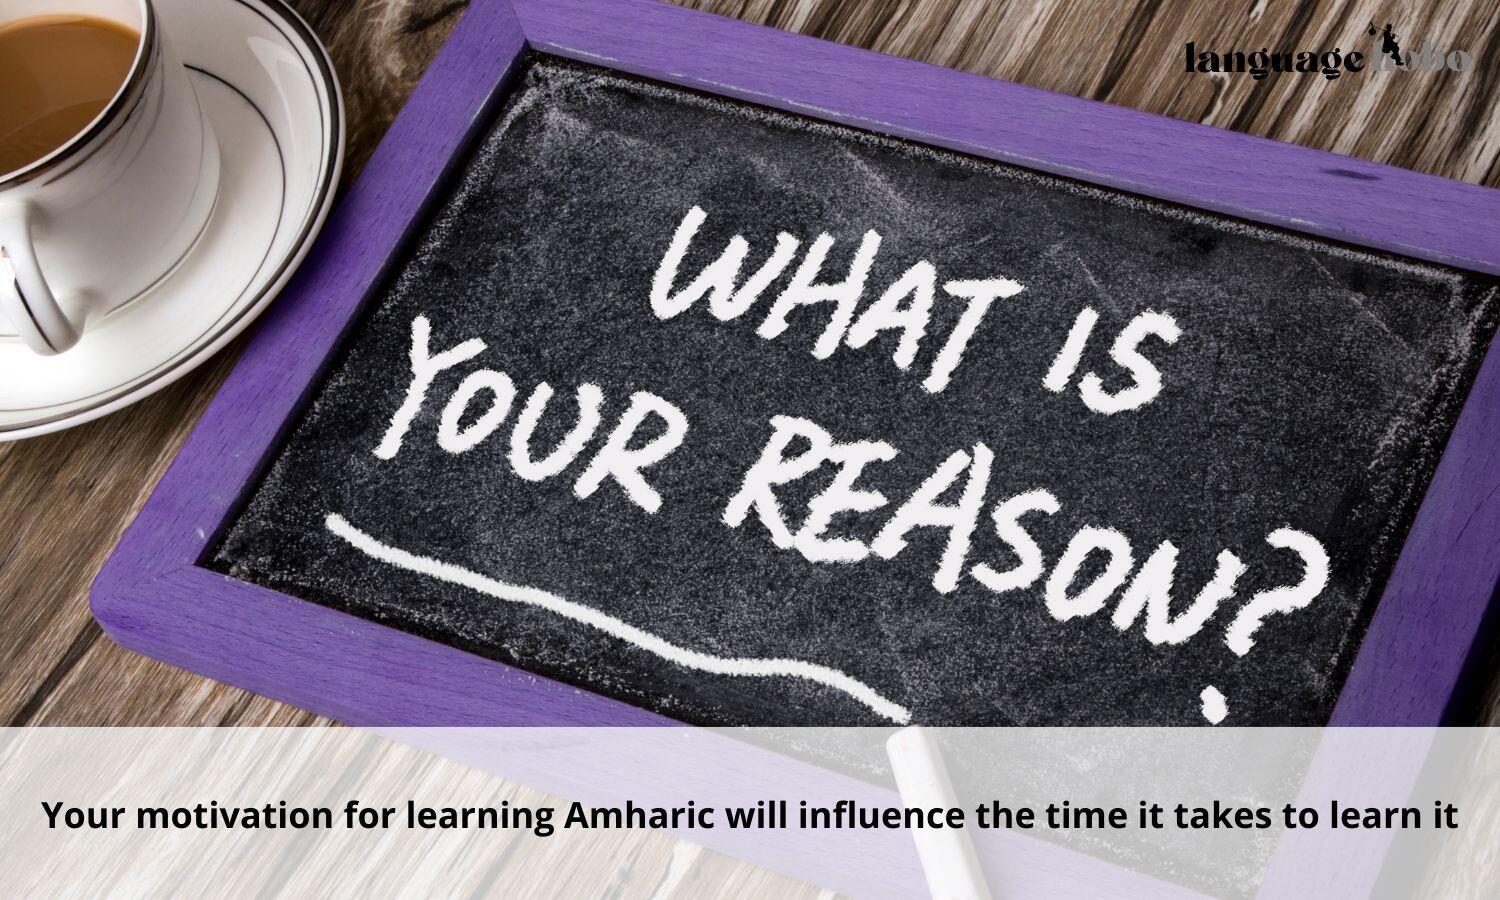 Motivation influences time it takes to learn amharic